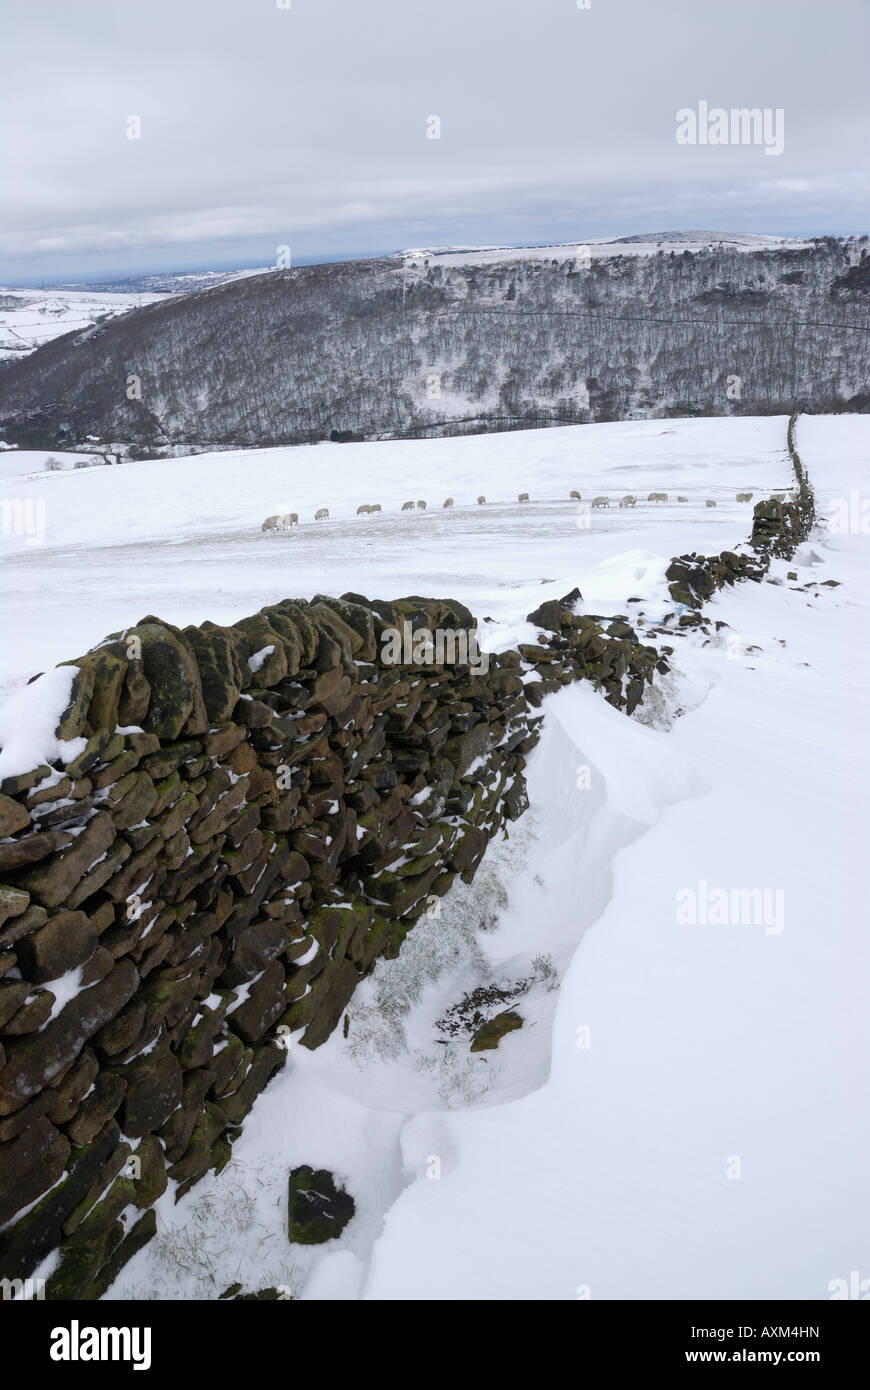 Dry stone wall in a snowy field near Hayfield, Derbyshire, England, with sheep in the middle distance Stock Photo